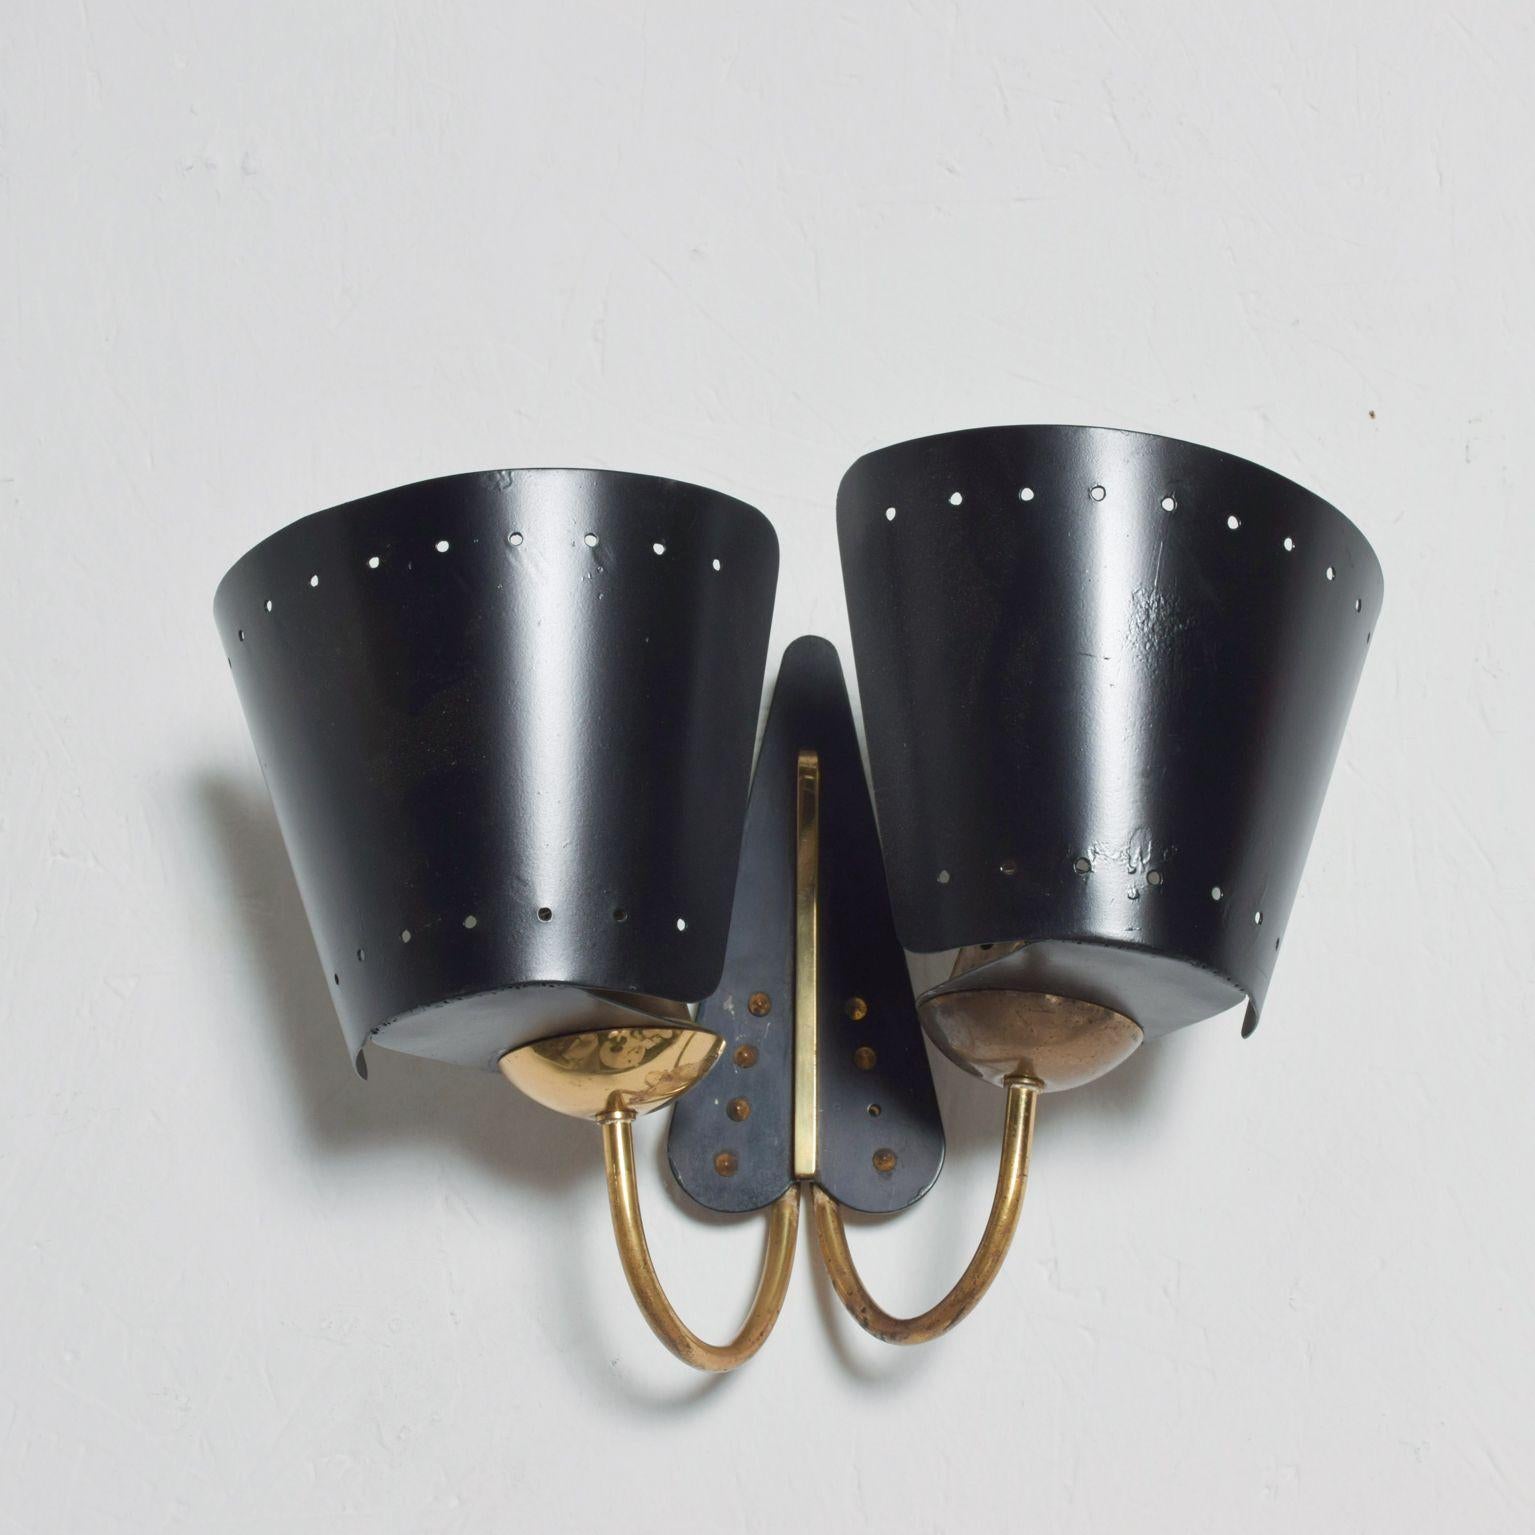 For your consideration: a Mid-Century Modern Italian double cone wall sconce in black attributed to the great Gio Ponti.

Made in Italy, unmarked, 1950s

Original unrestored preowned vintage item with visible wear. Please refer to